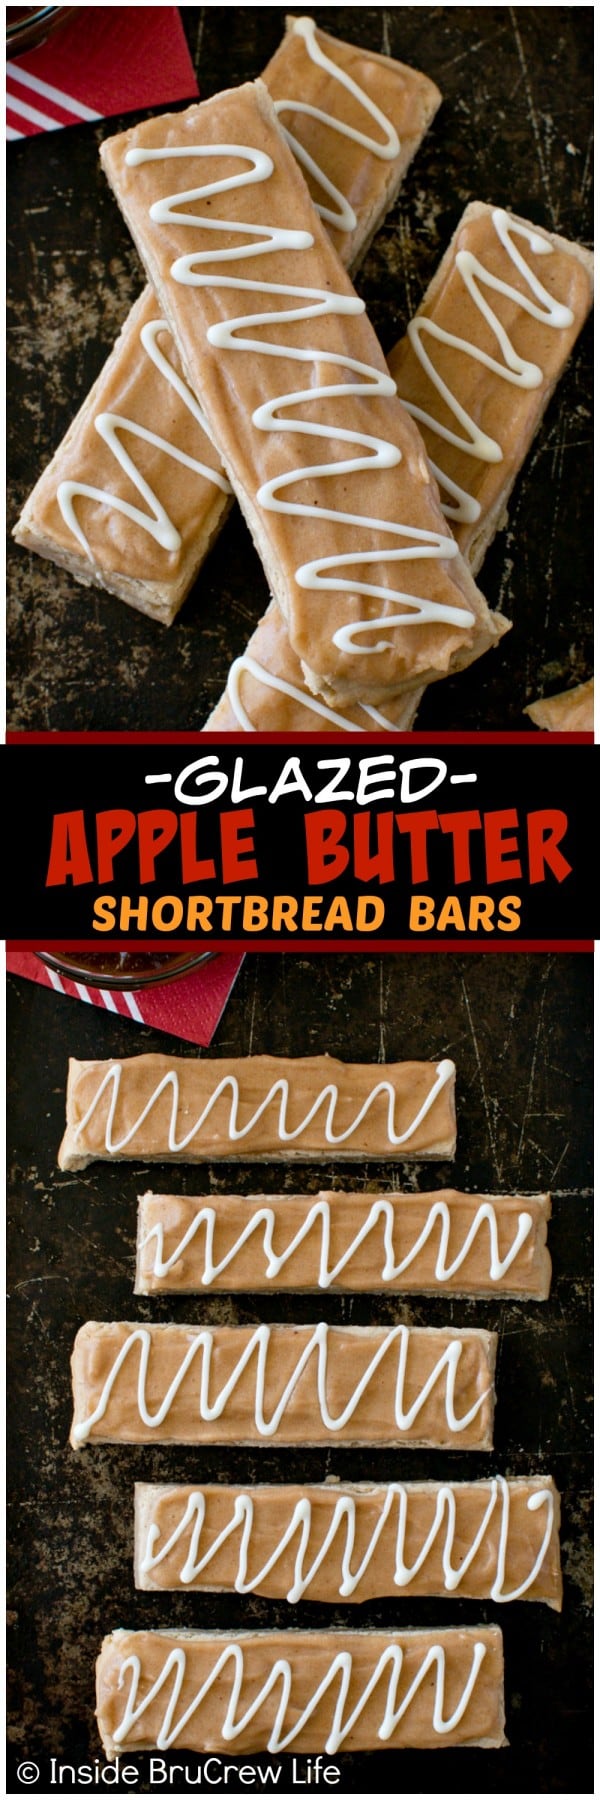 Glazed Apple Butter Shortbread Bars - apple butter in the cookie and glaze makes these sweet cookie sticks a great fall dessert recipe!